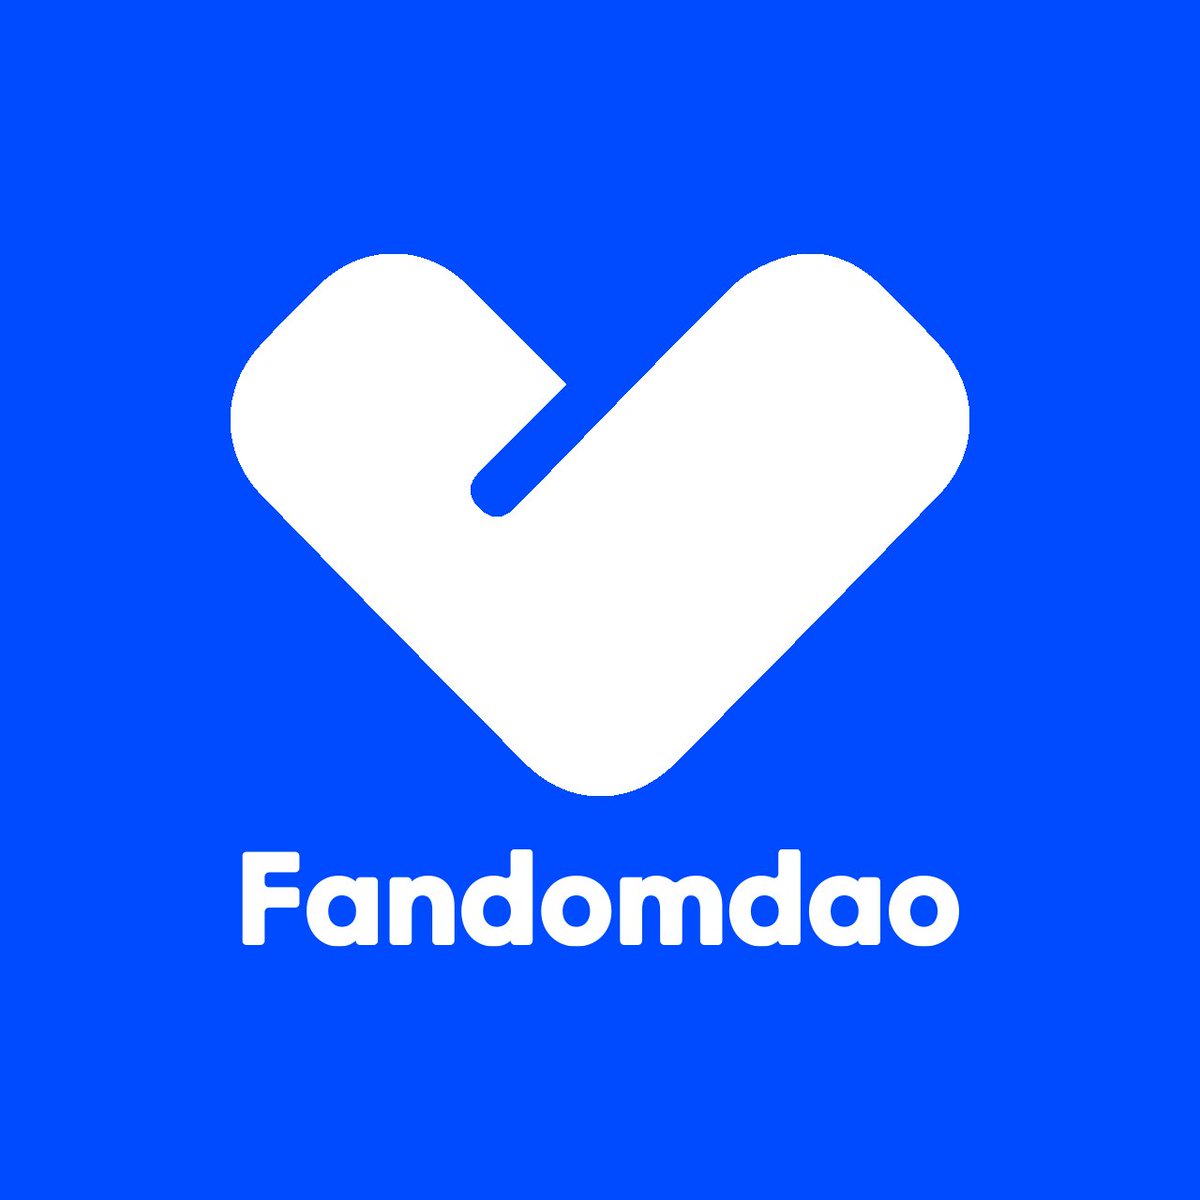 💙 #Socialfi is leading the #crypto trends at the moment. Among the many socialfi projects , #Fandomdao will continue to be at the top.

Stay with fandomdao.com 🎊

#Web3Social #reward $Fand #points